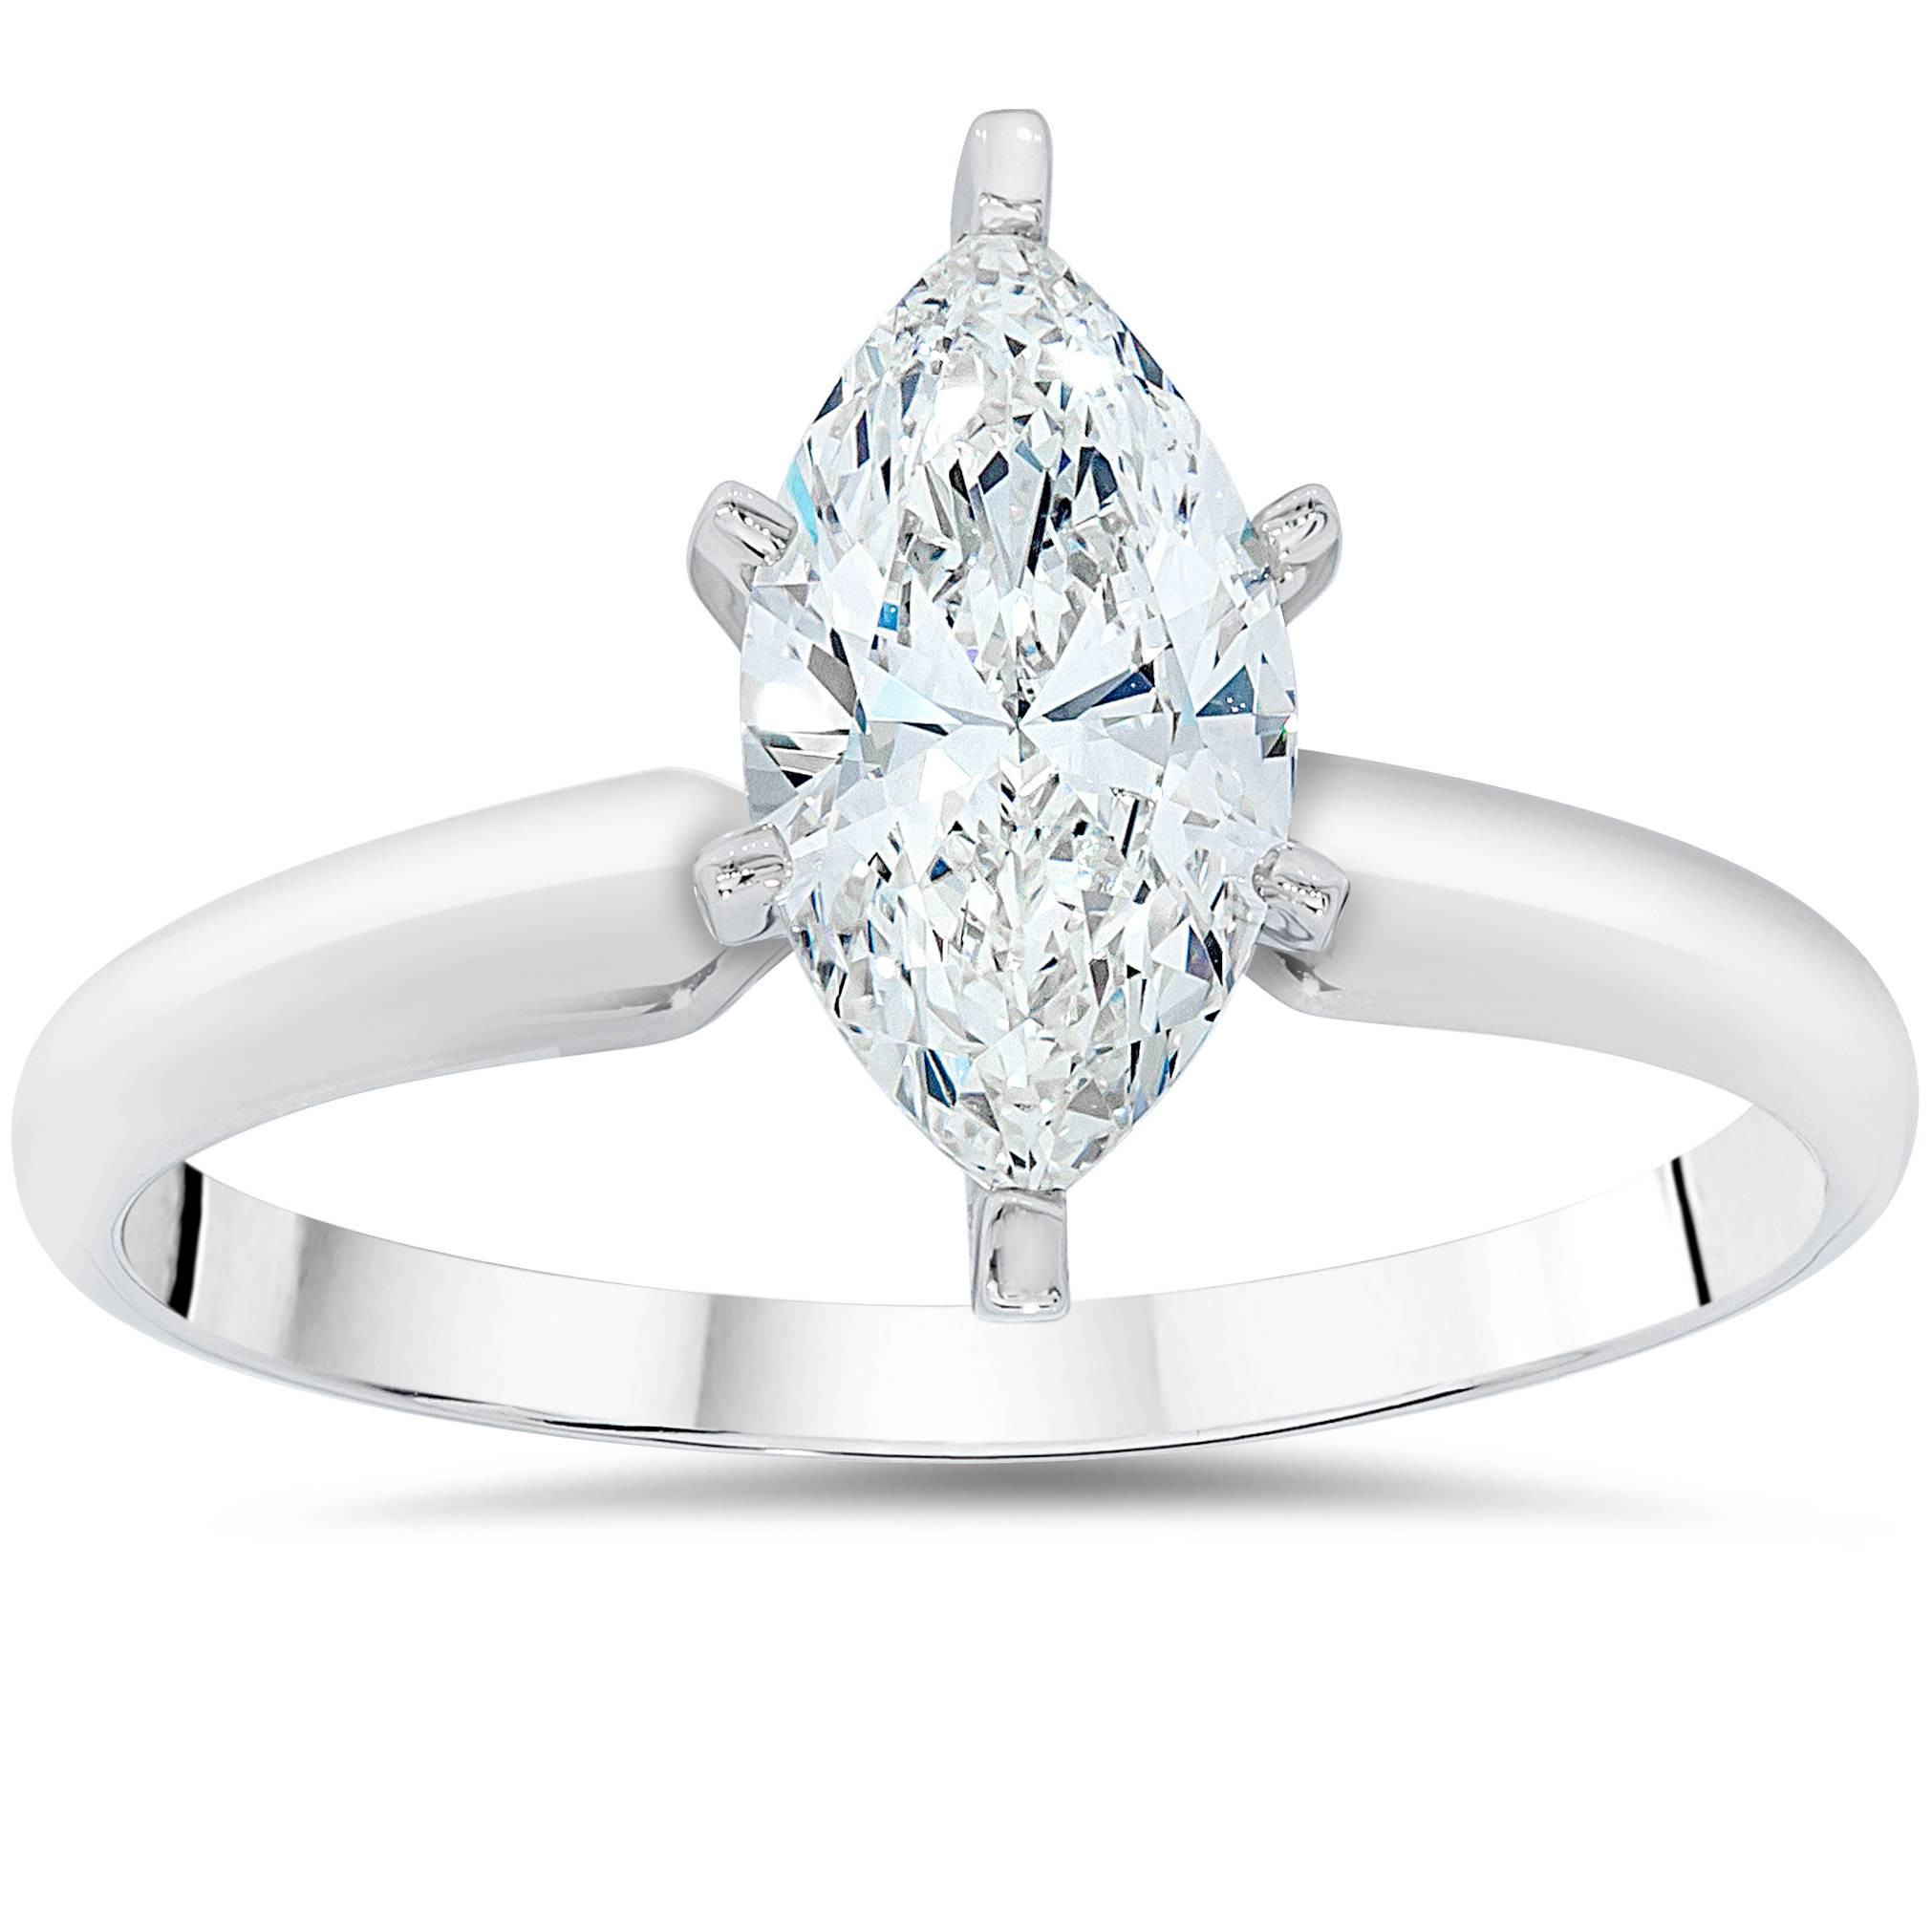 Marquise Diamond Engagement Ring
 1ct Solitaire Marquise Enhanced Diamond Engagement Ring